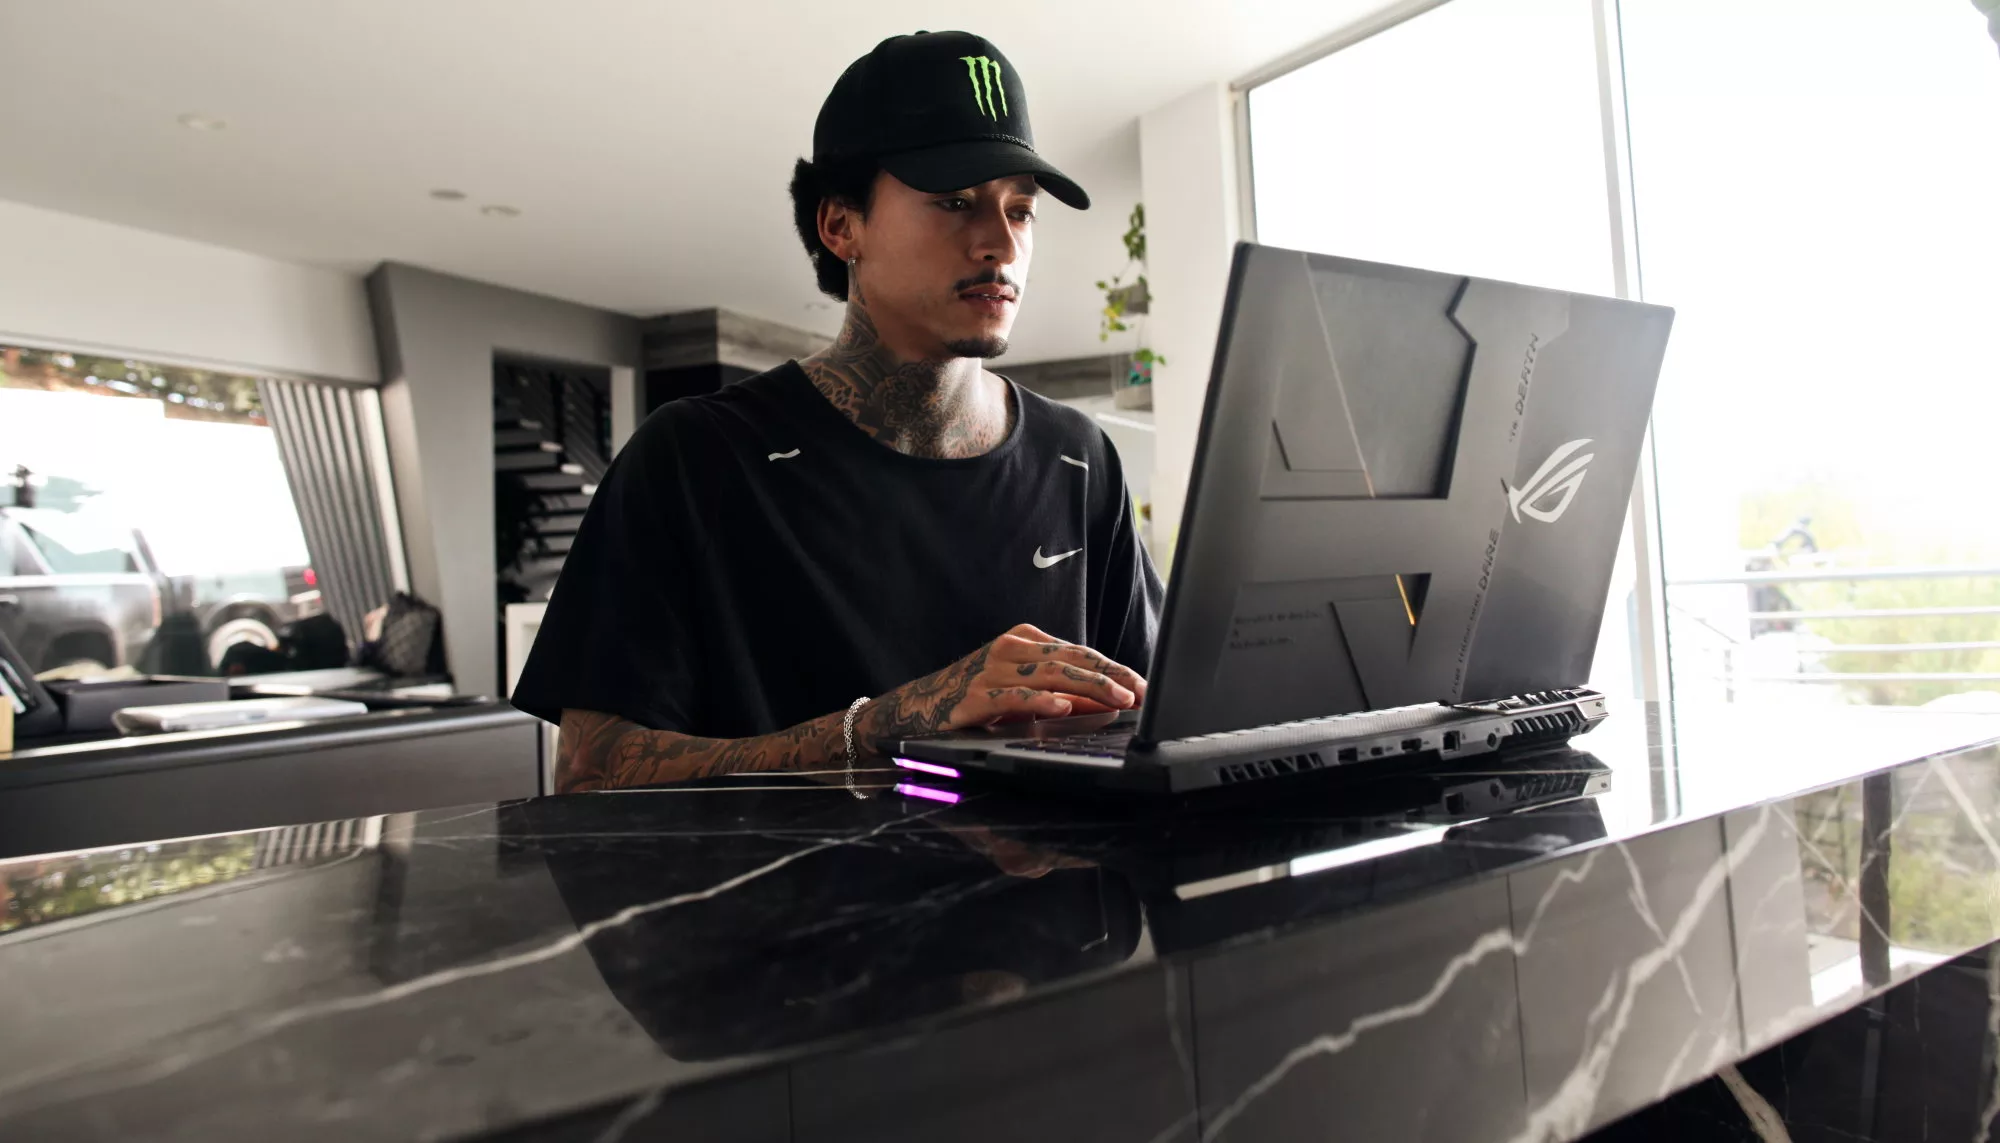 Nyjah Huston sitting at a countertop, with the custom lid of his ROG Strix laptop visible.